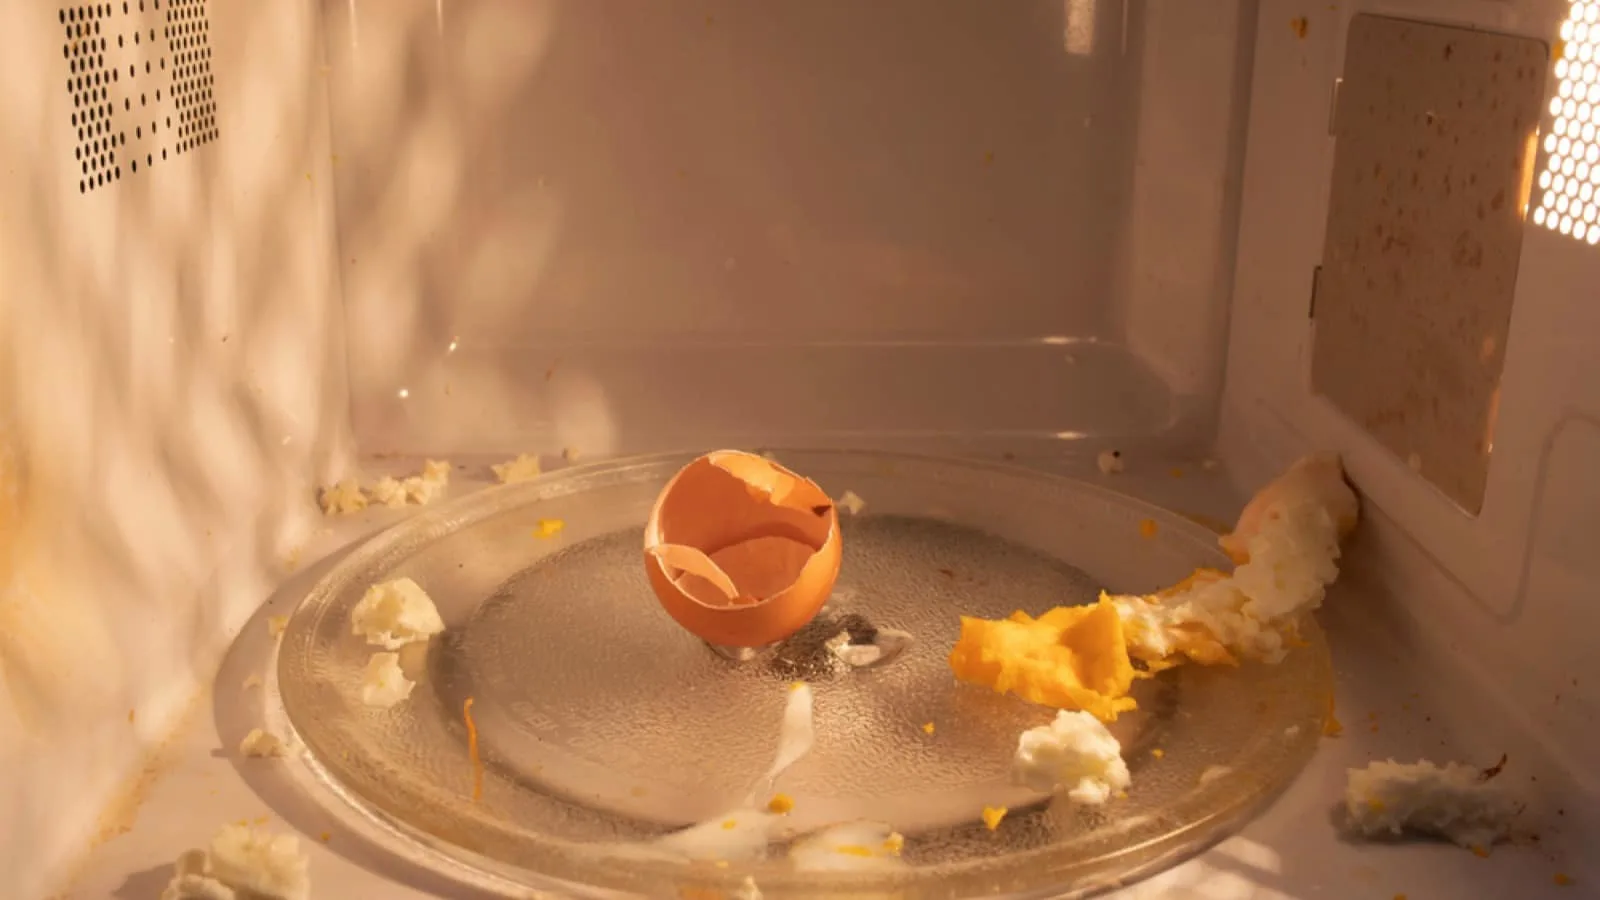 Exploding eggs in microwave